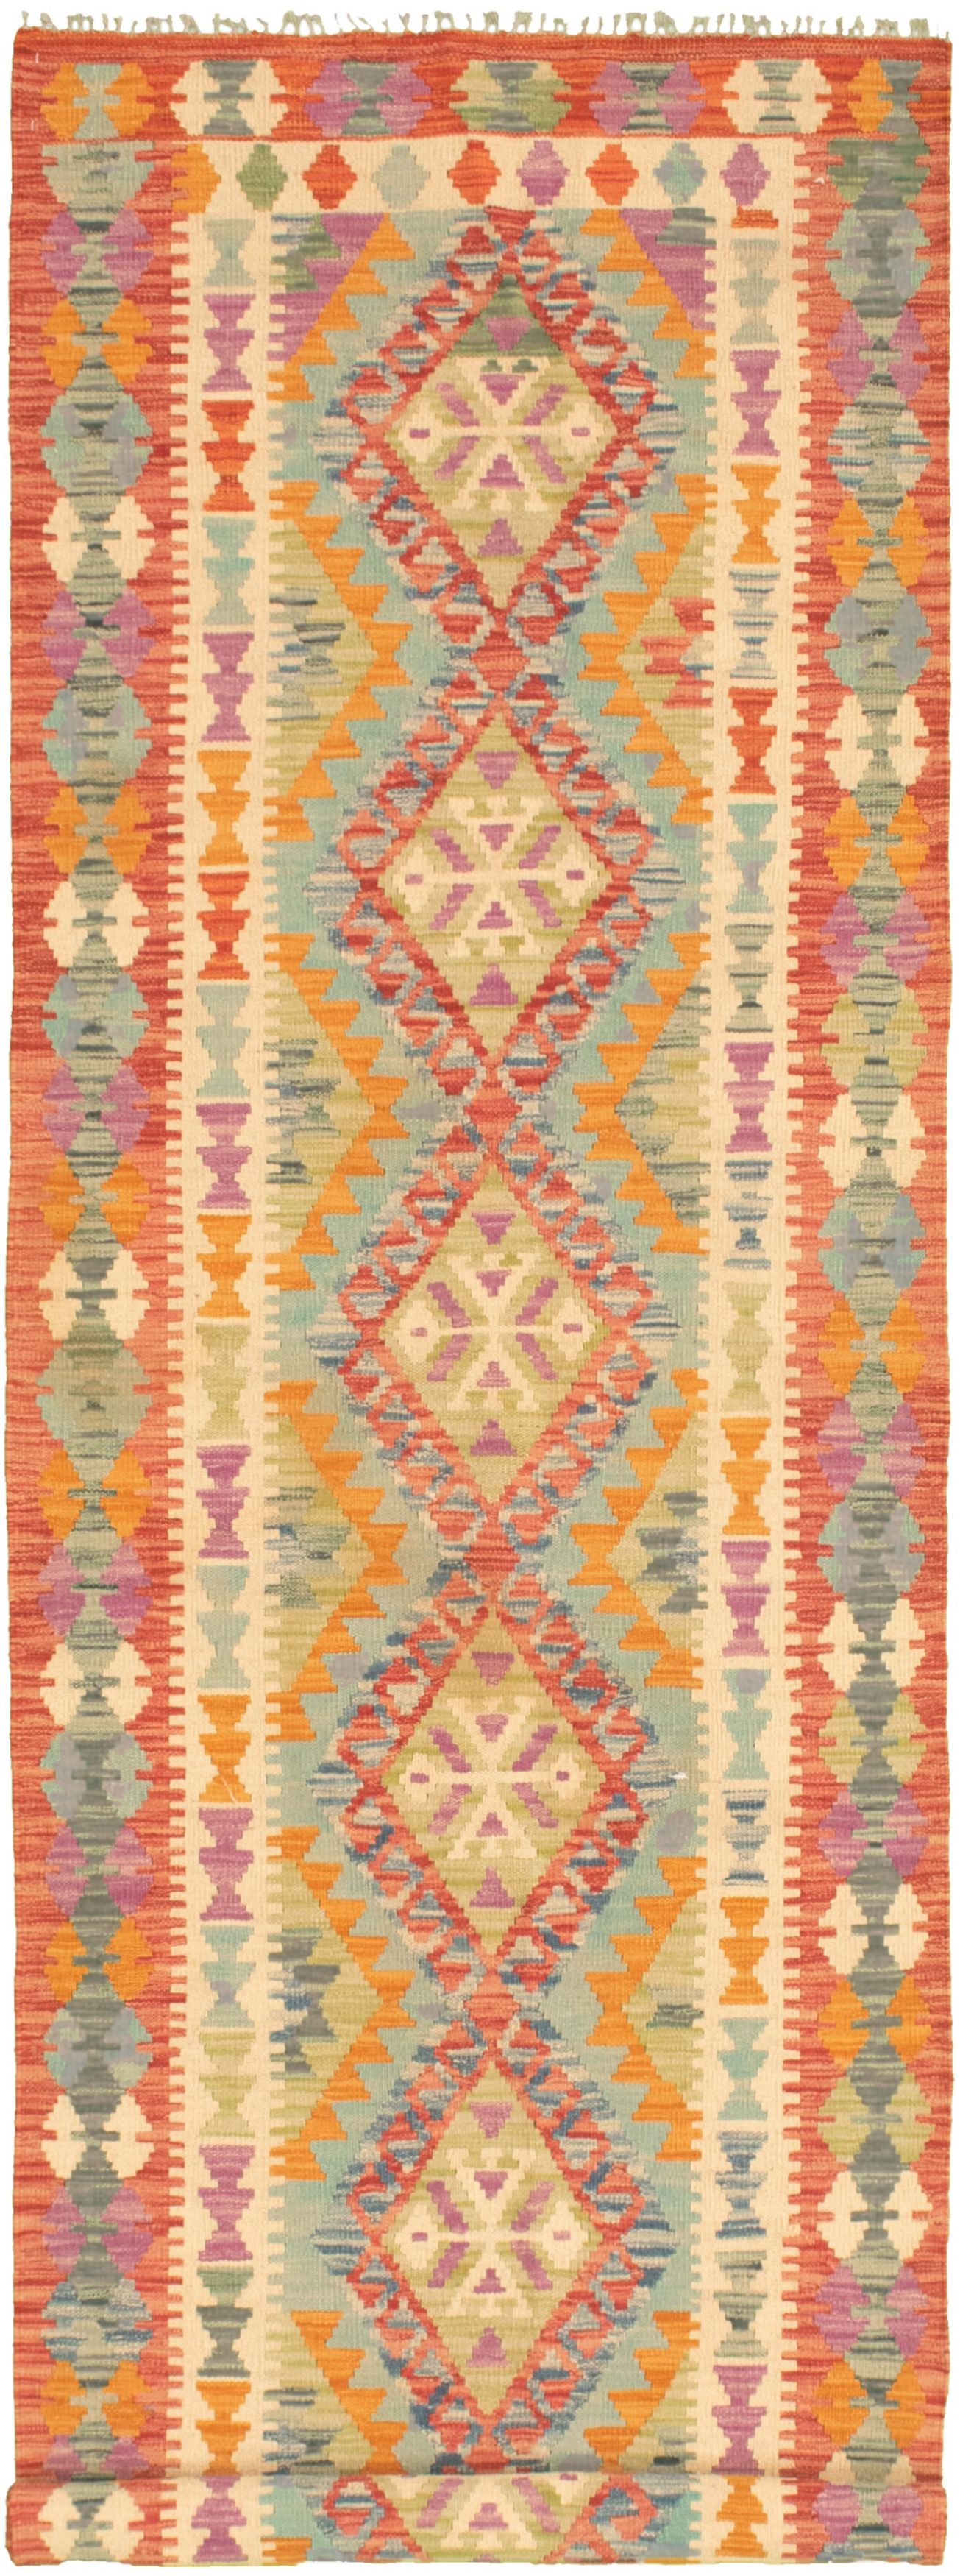 Hand woven Bold and Colorful  Cream, Red Wool Kilim 2'10" x 9'10" Size: 2'10" x 9'10"  